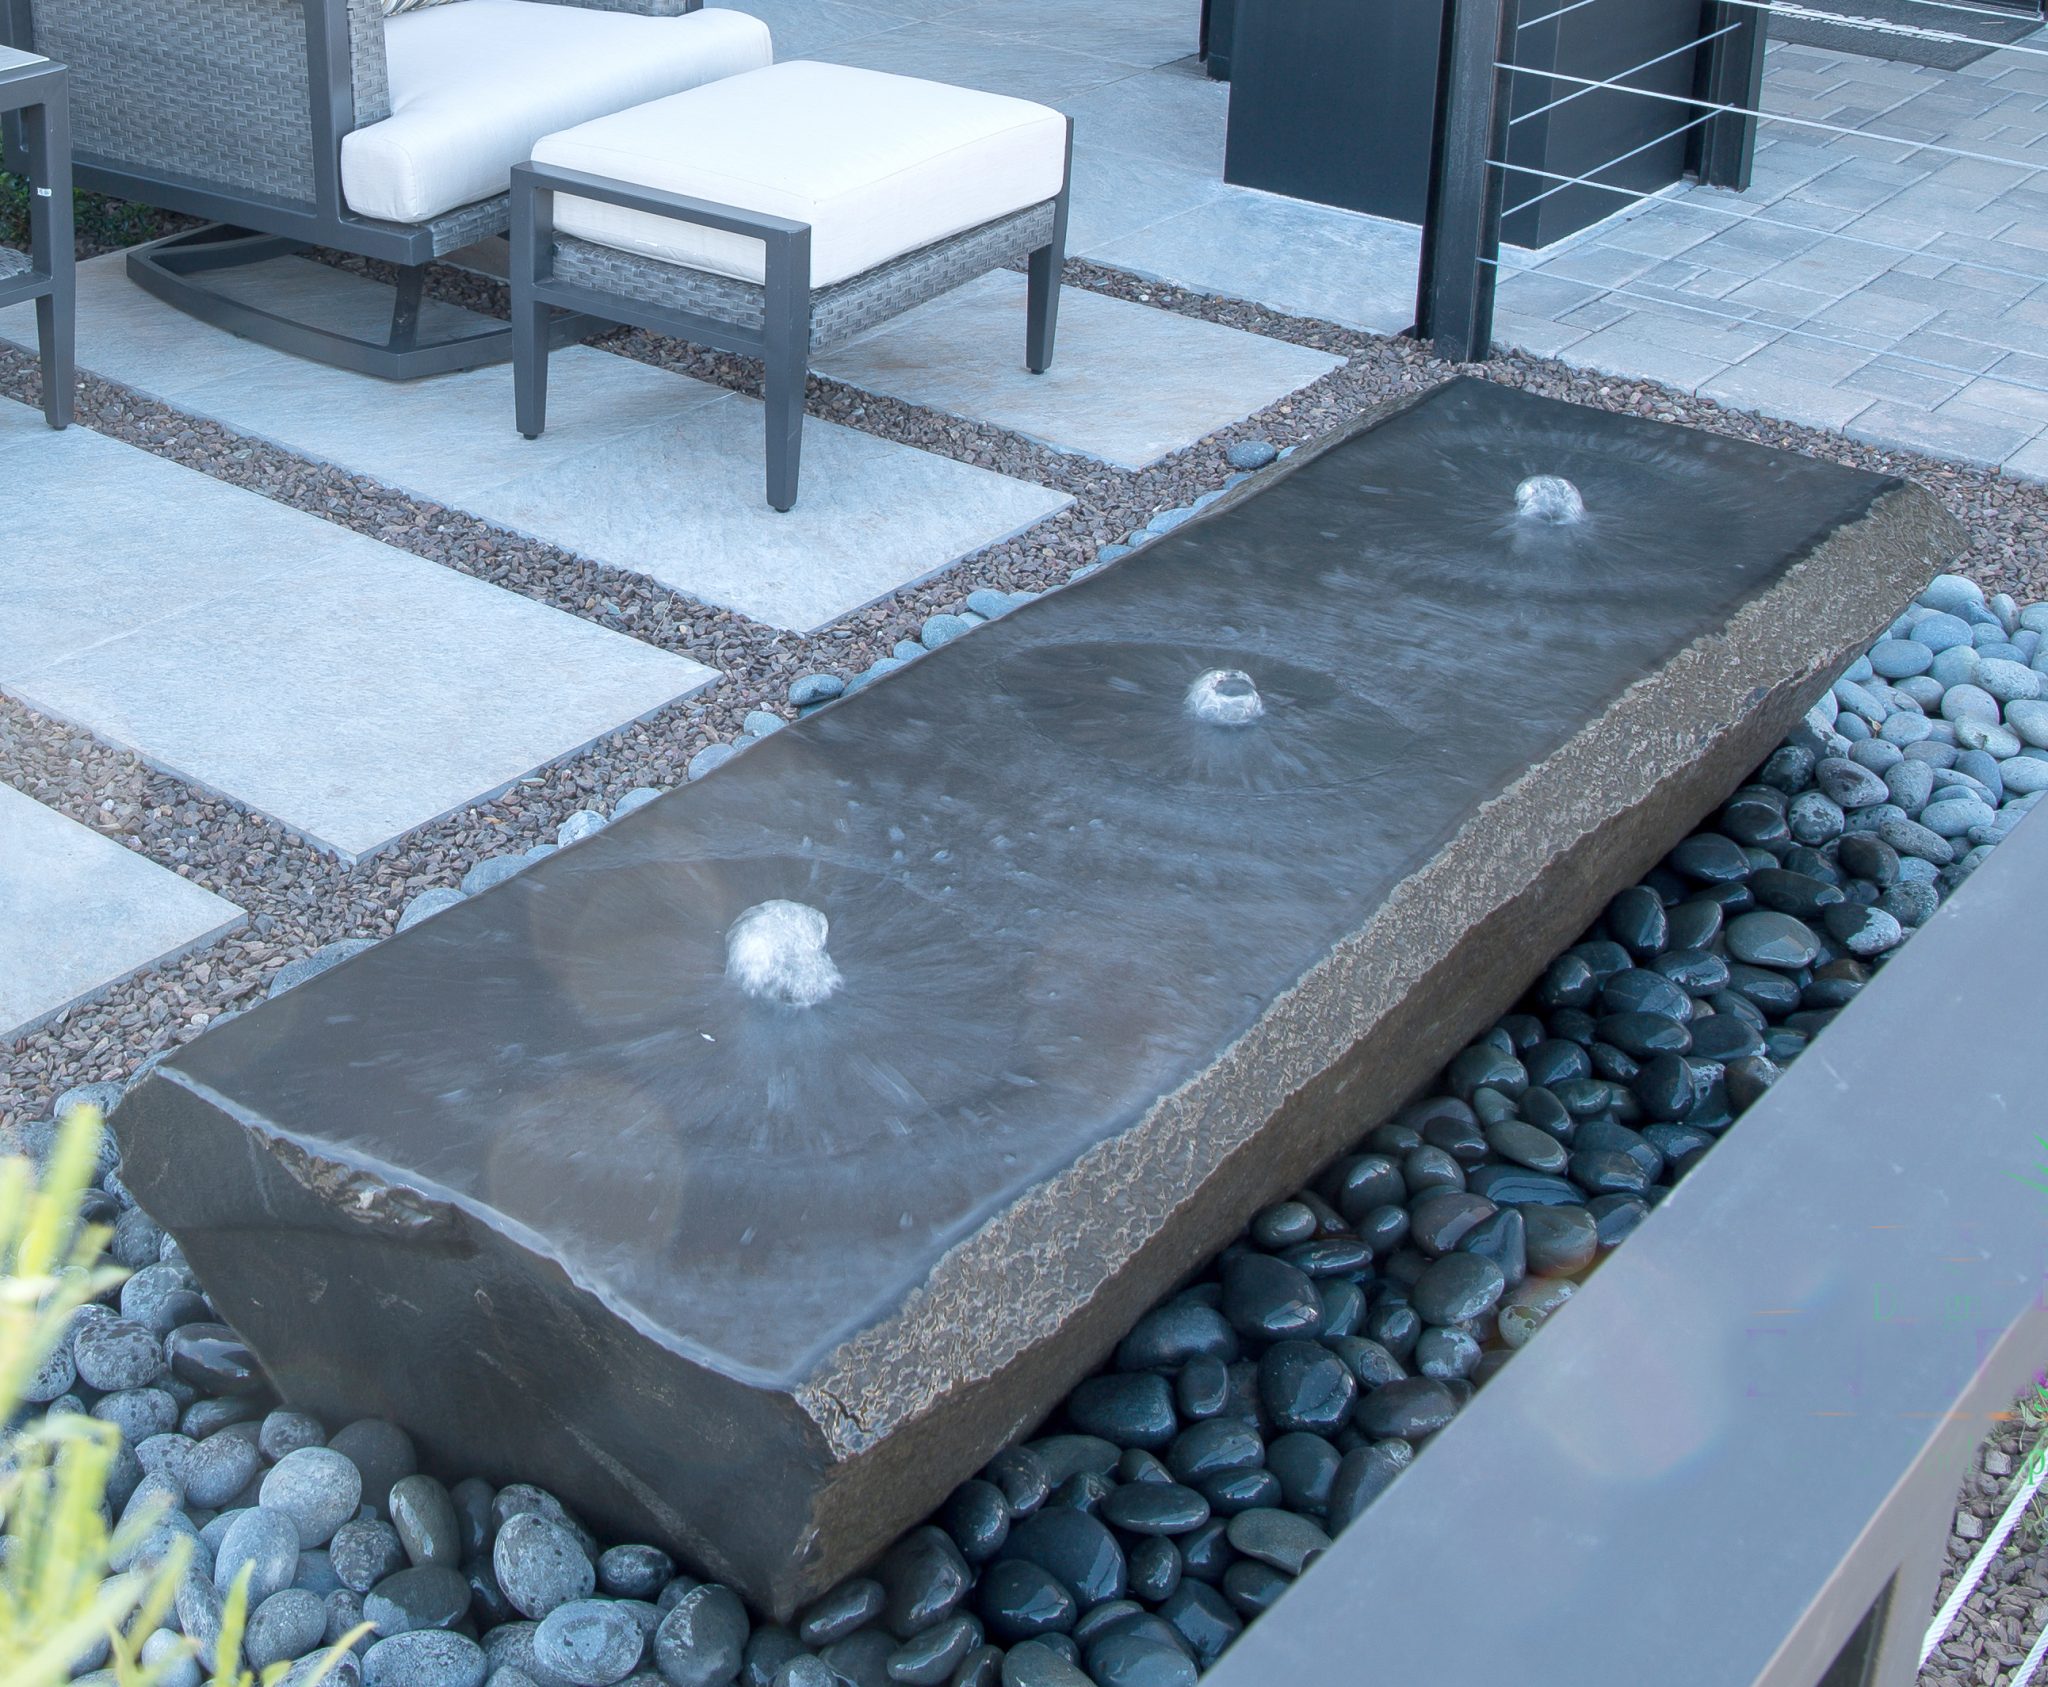 Why should place water feature in garden? – Magic Stone